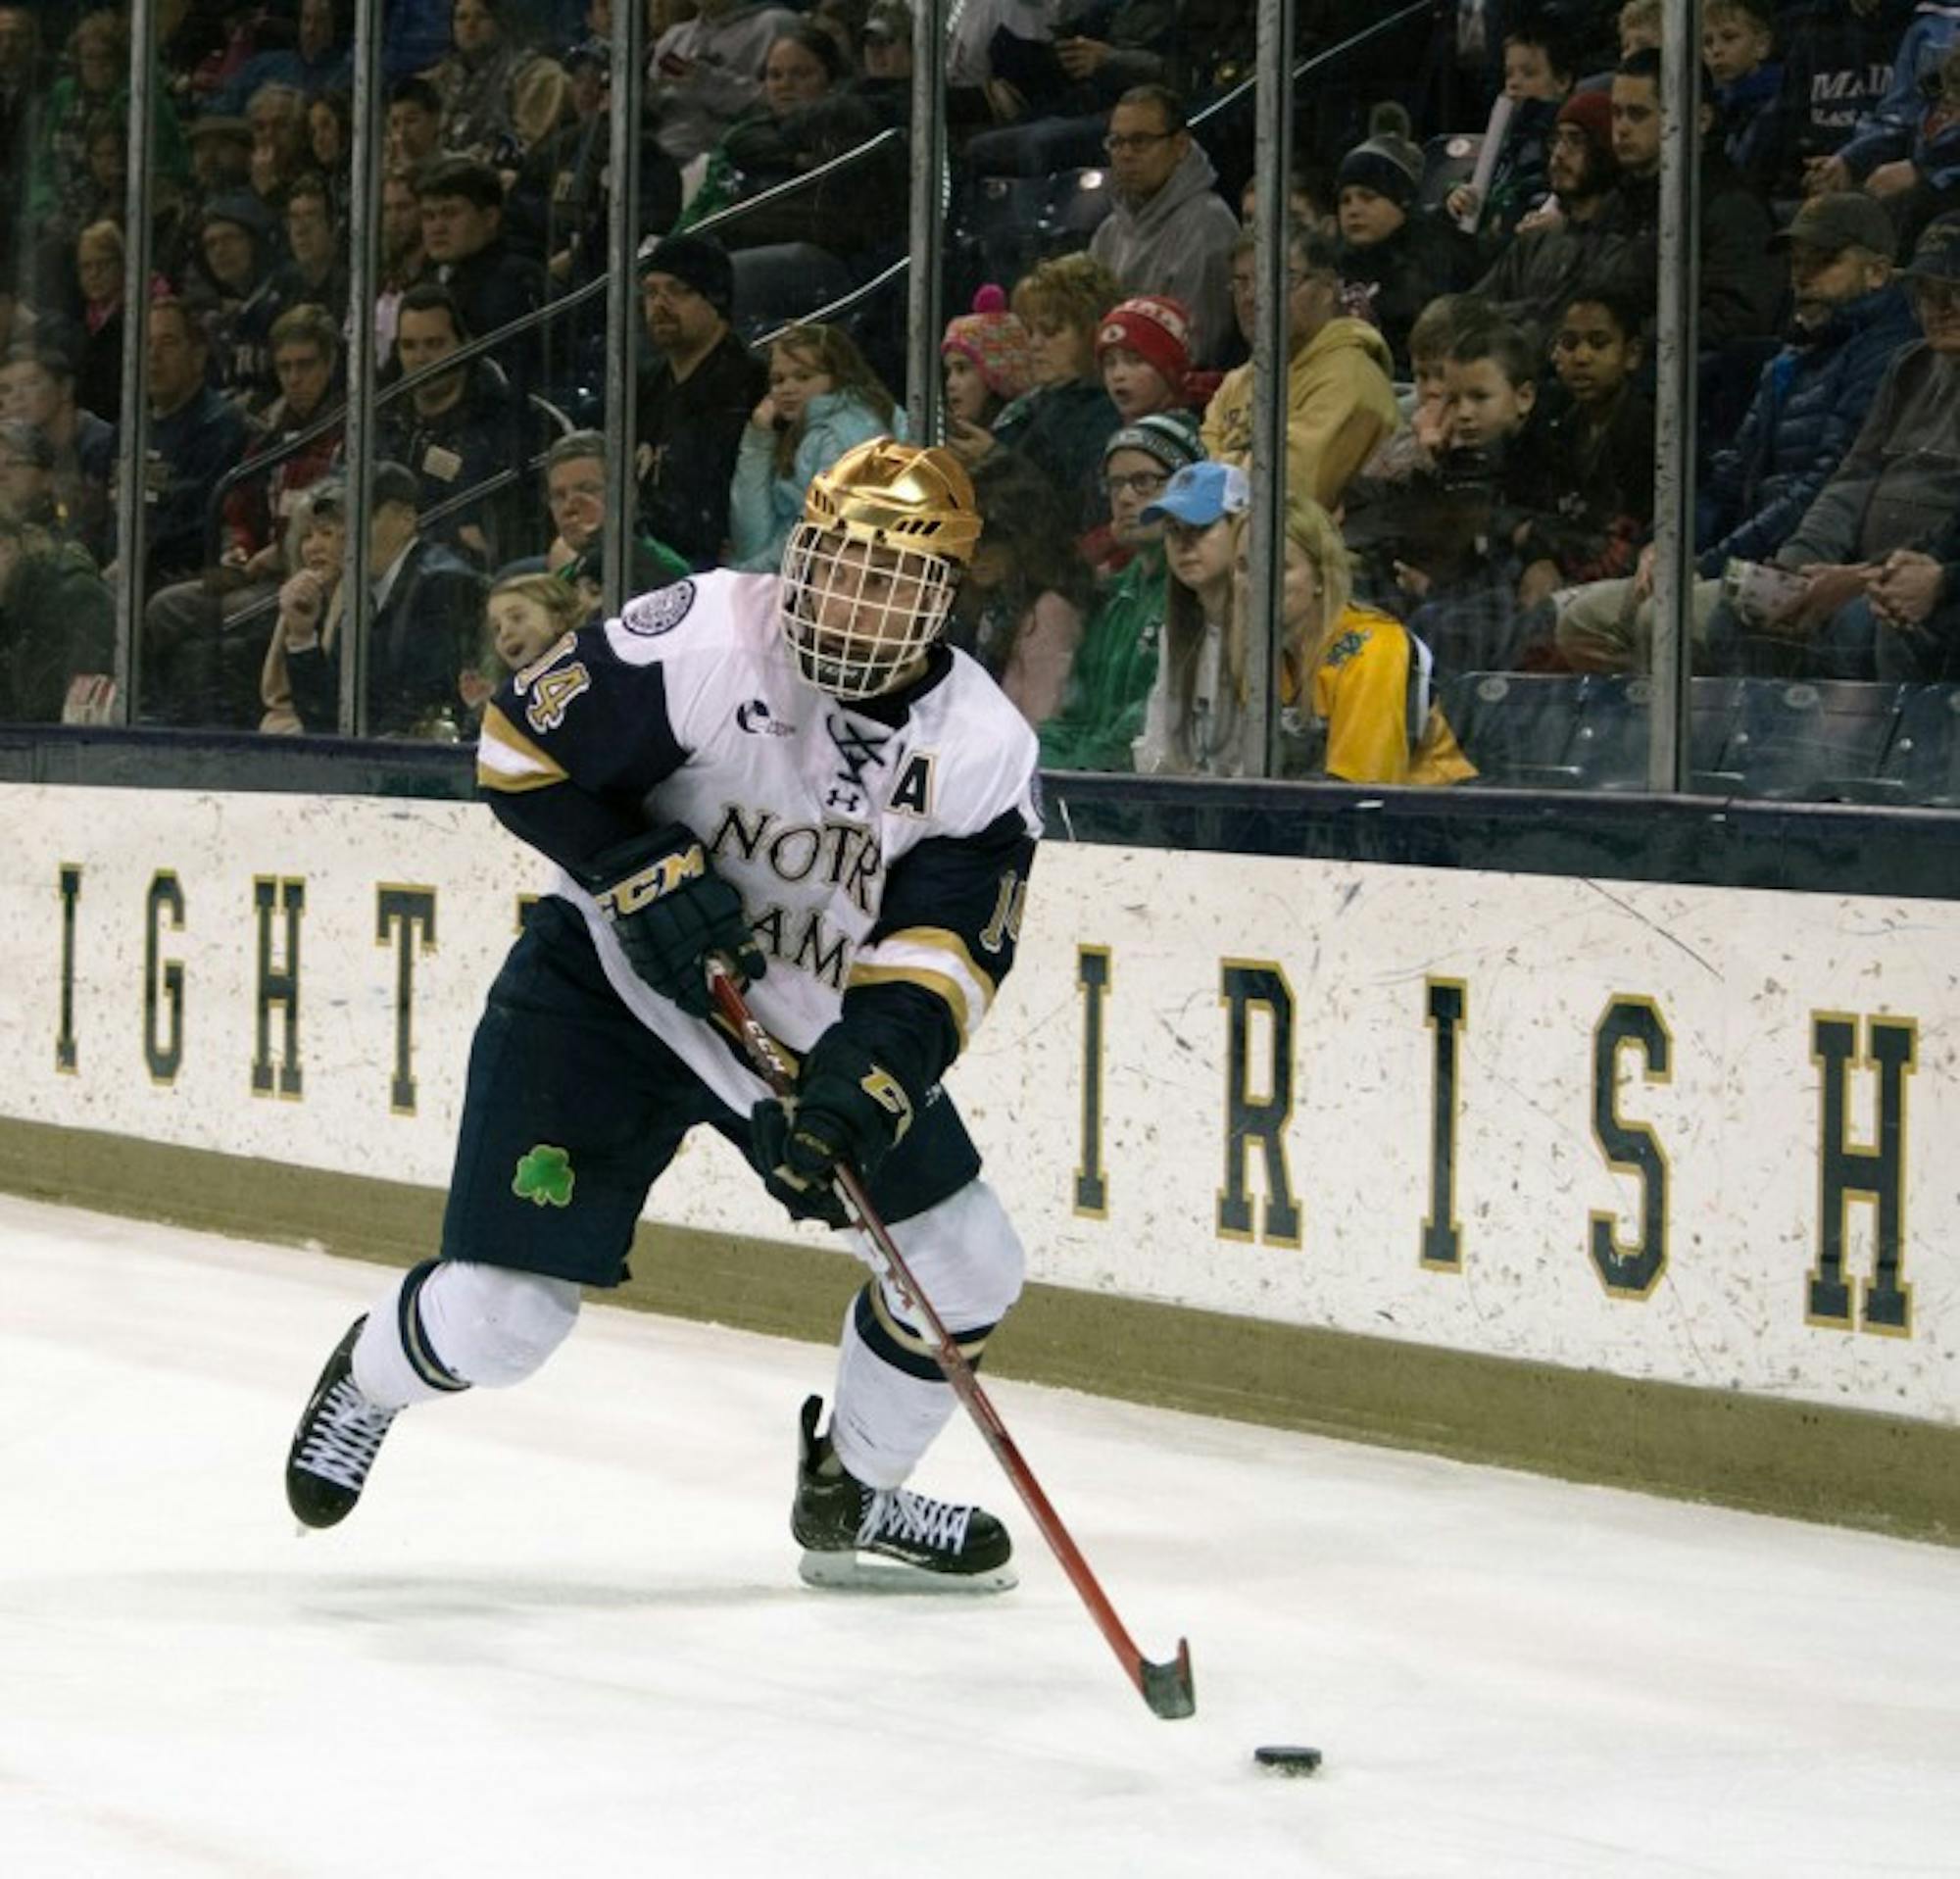 Irish senior center Thomas DiPauli skates down the ice with the puck during Notre Dame’s 5-1 victory over Maine on Saturday at Compton Family Ice Arena. DiPauli recorded an assist in the second period.